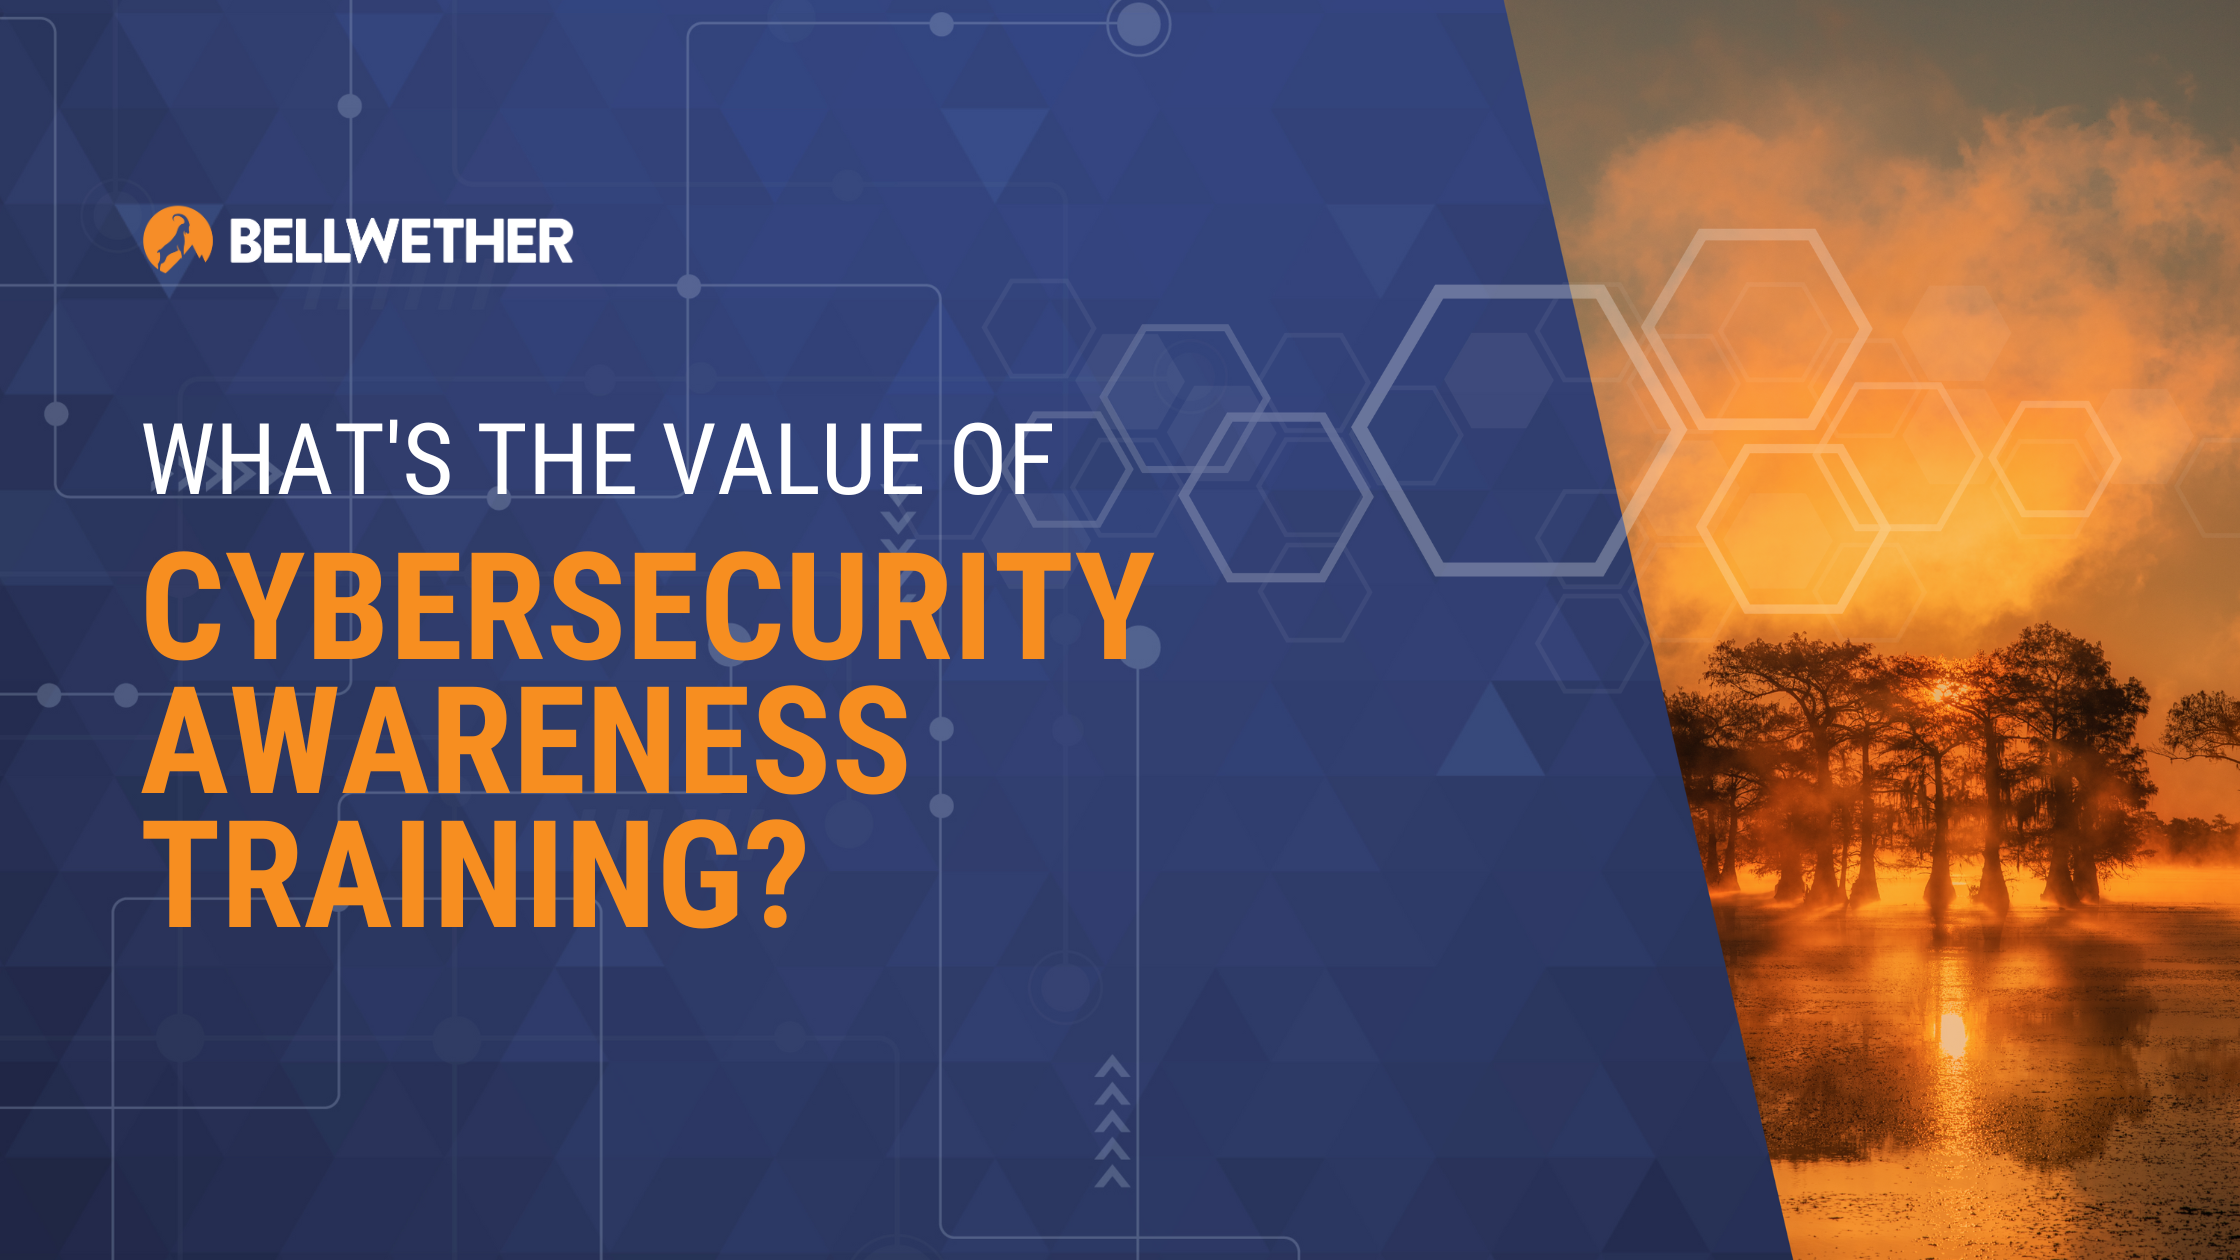 What's the value of cybersecurity awareness training?